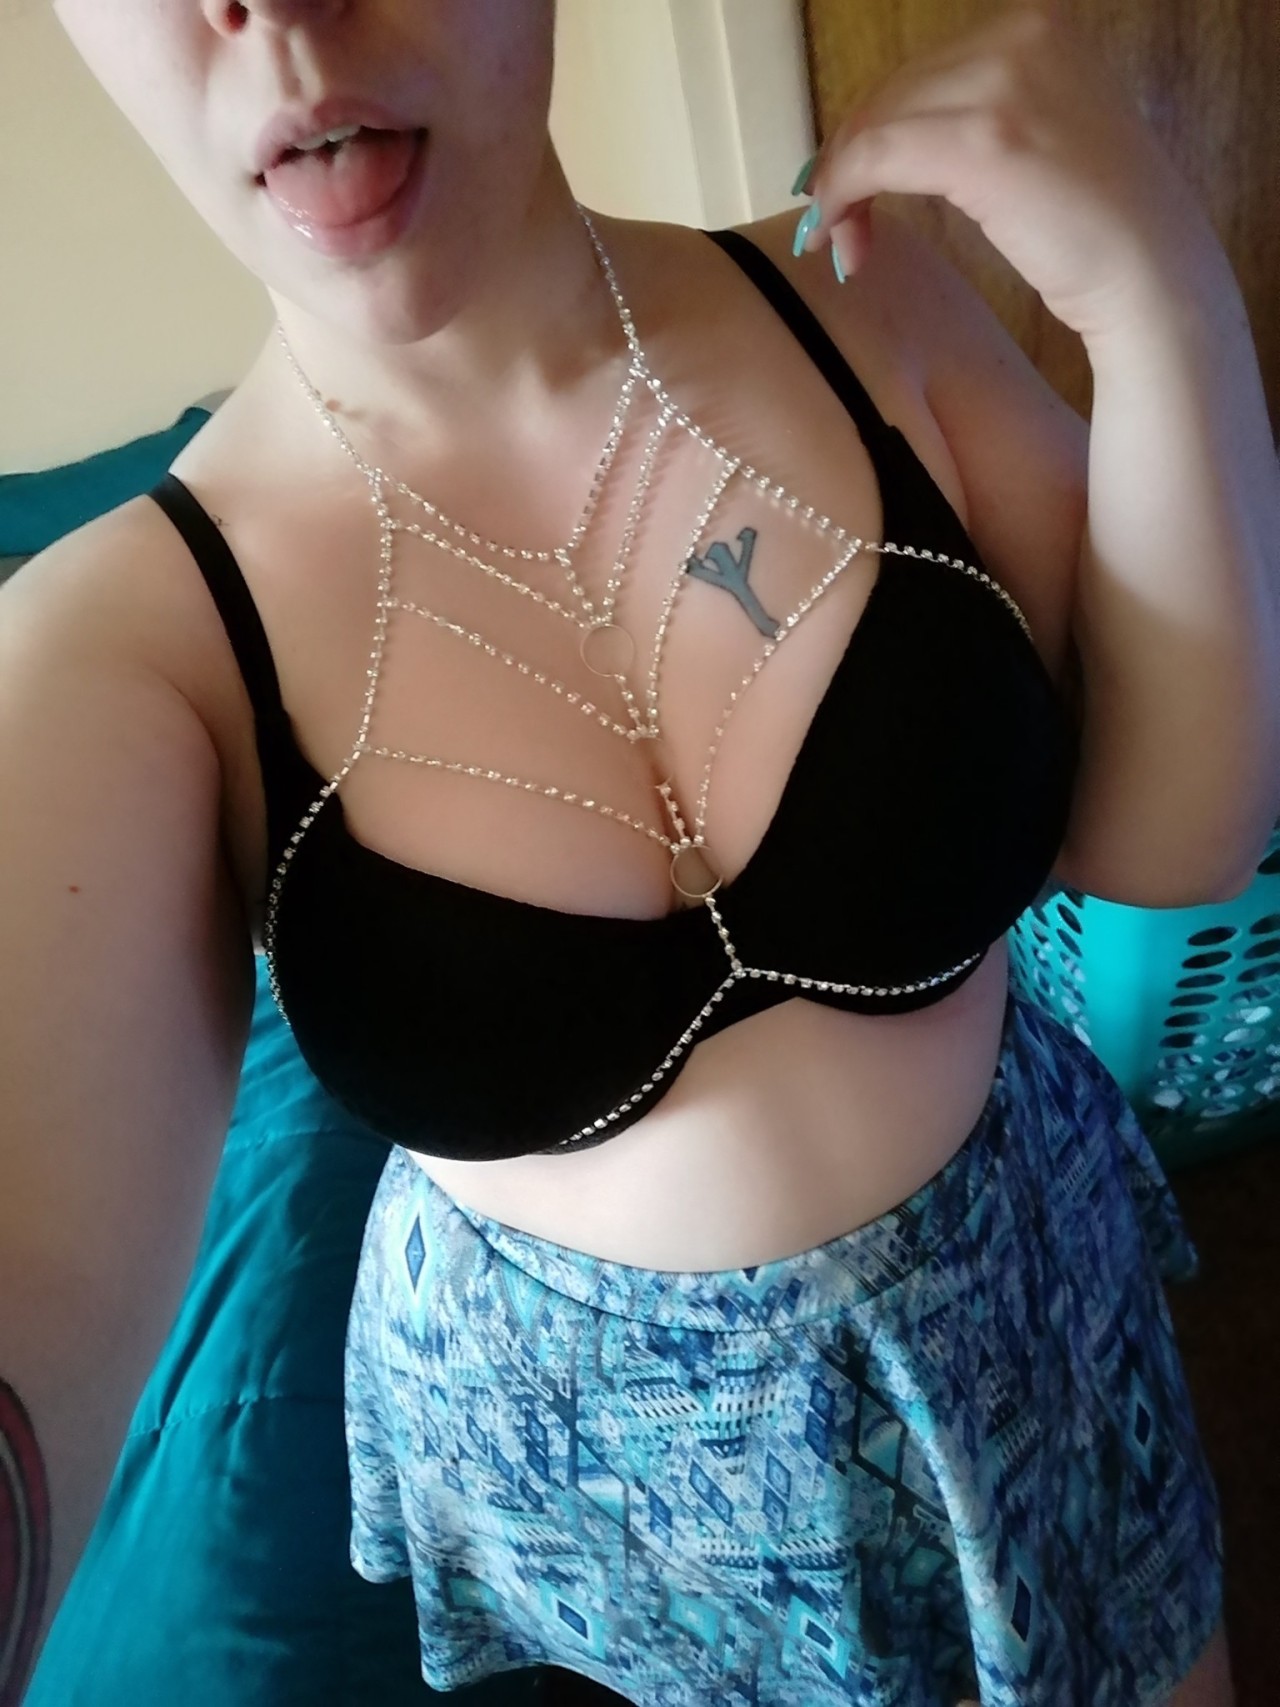 Just some new accessories 🥰OnlyFans saw porn pictures